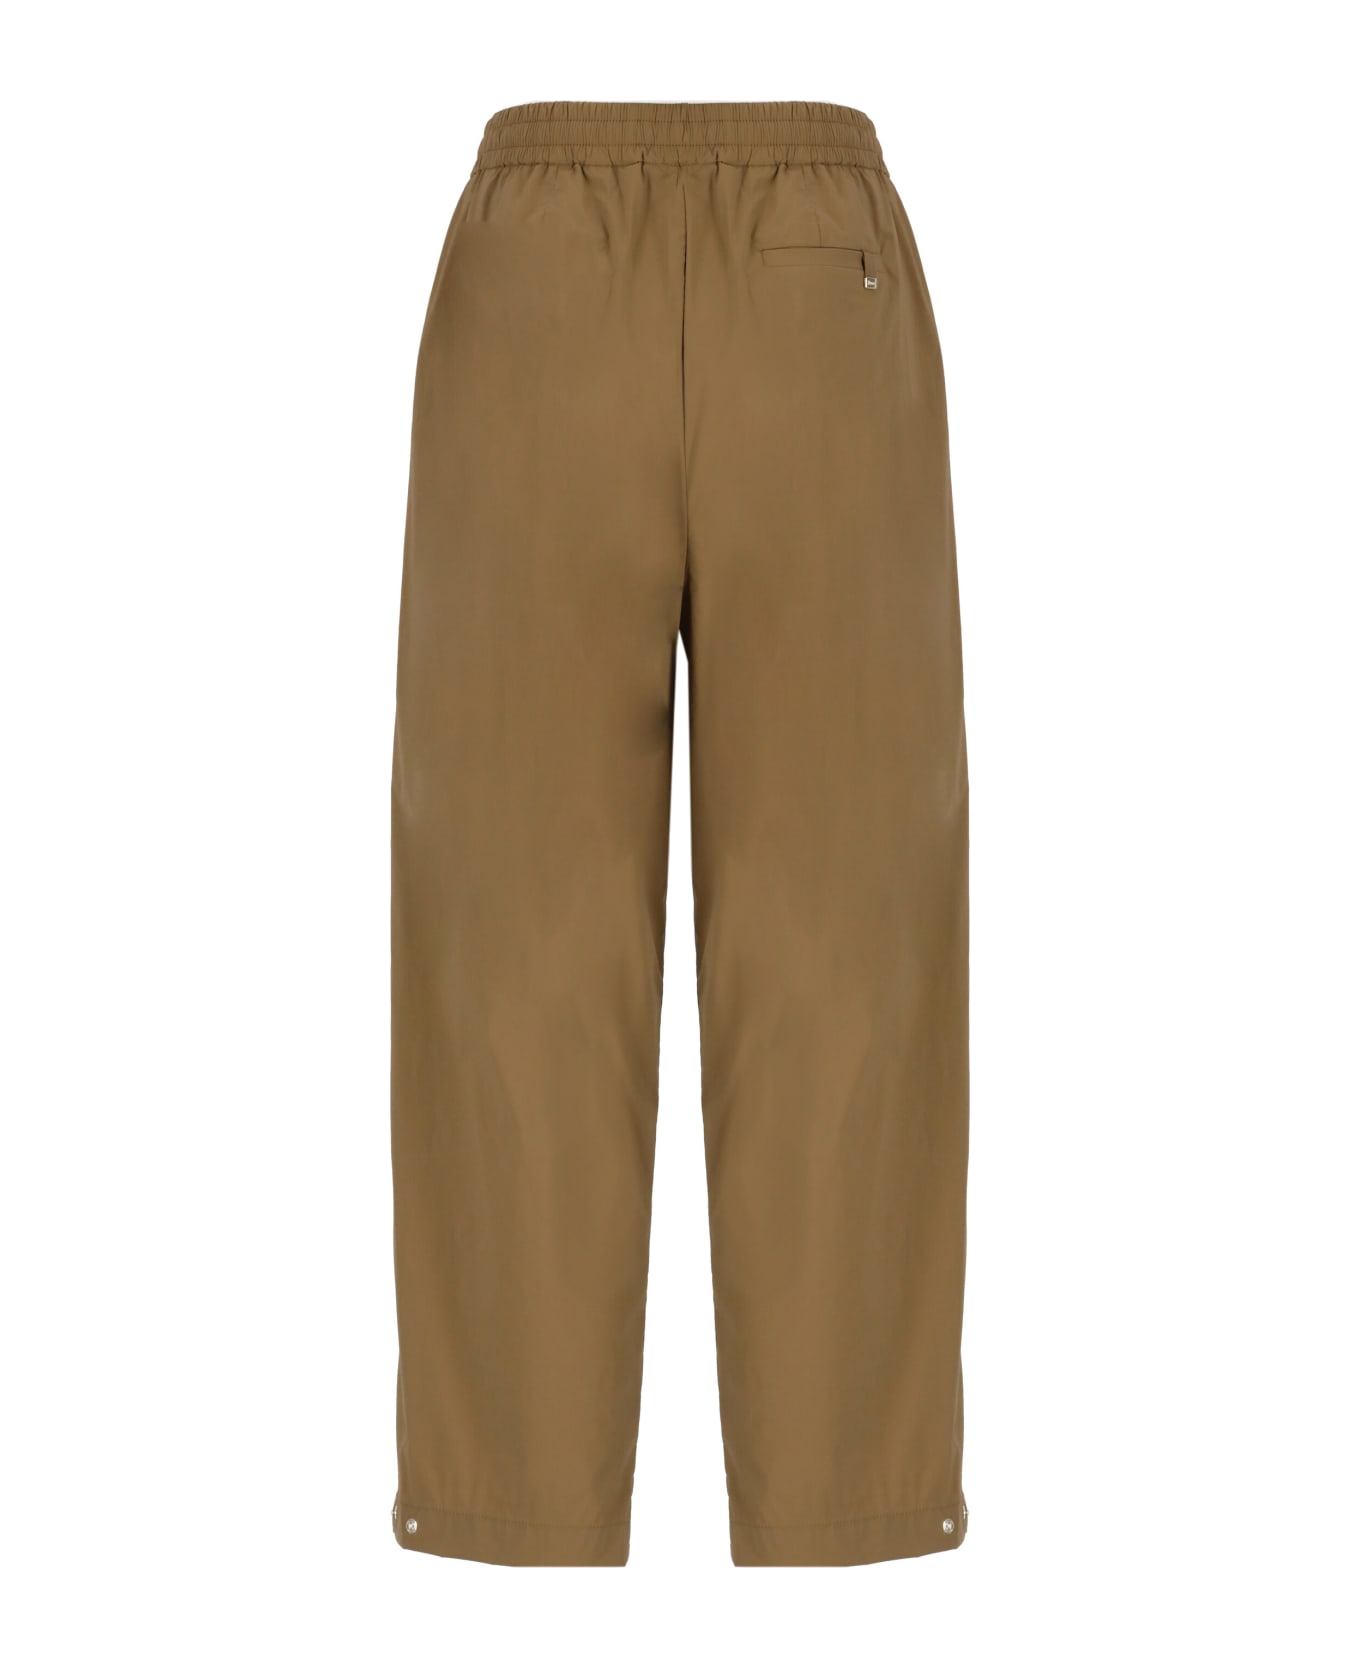 Herno Light Nylon Stretch Trousers - Brown ボトムス